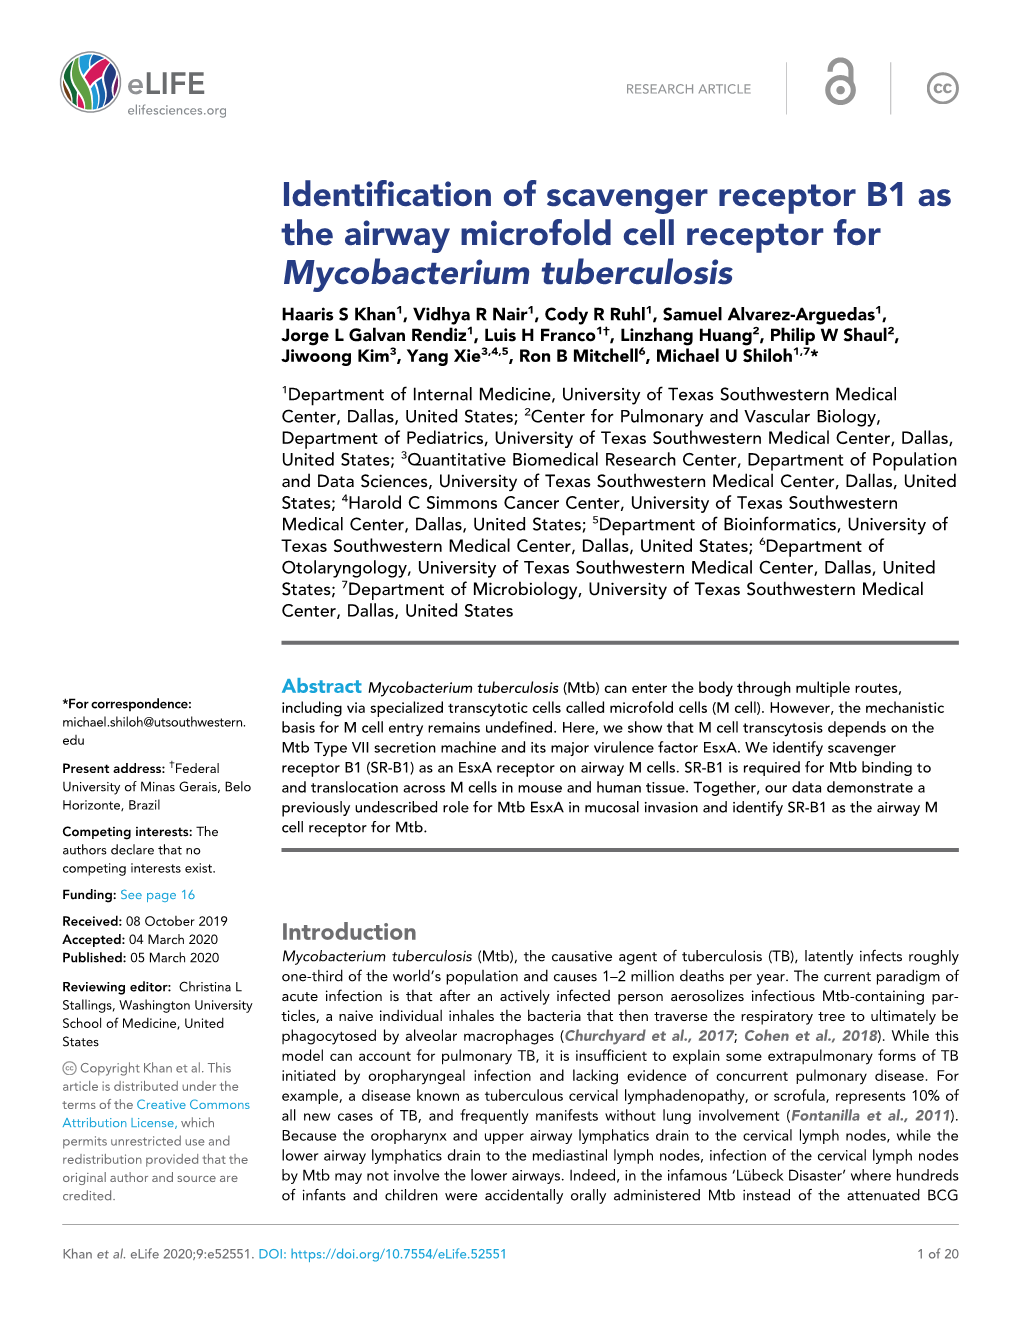 Identification of Scavenger Receptor B1 As the Airway Microfold Cell